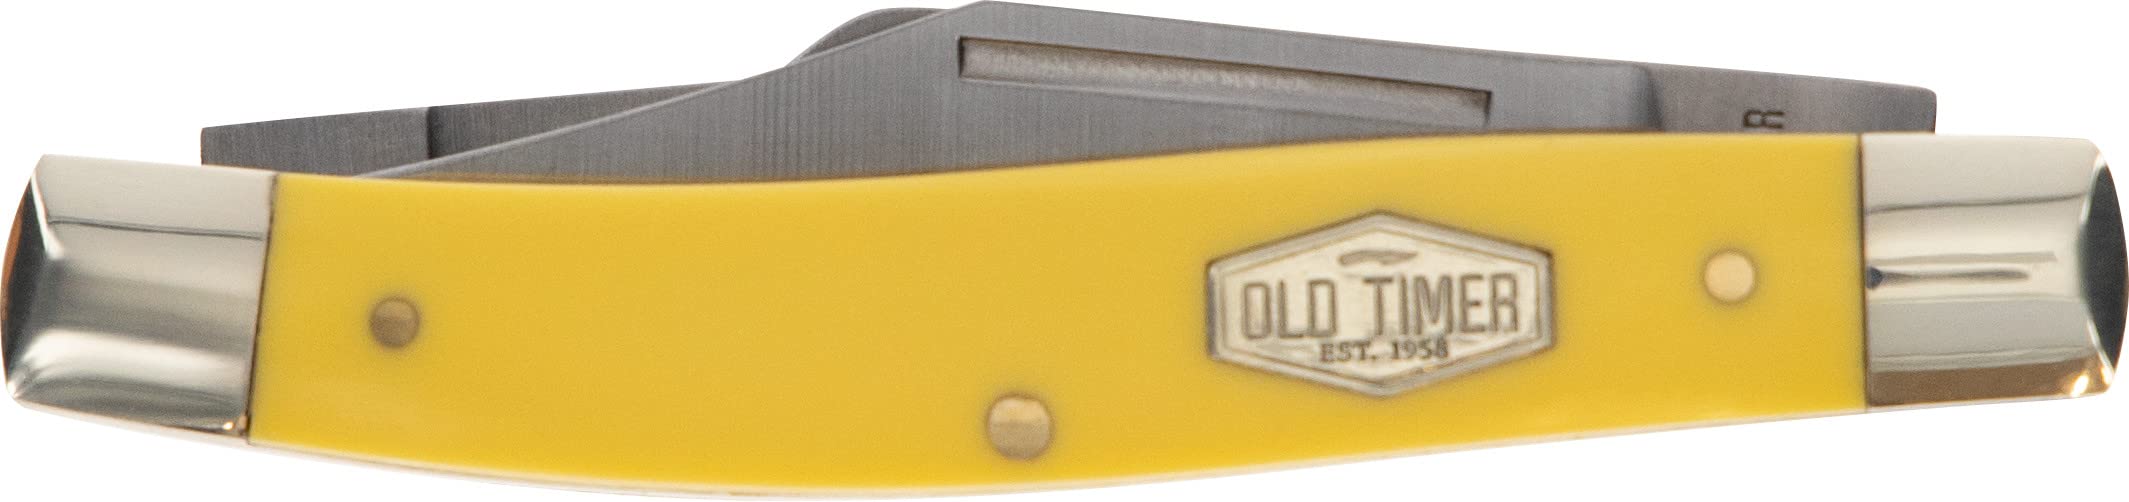 Old Timer 8OTY Senior 6.9in S.S. Traditional Folding Knife with 3in Clip Point Blade and Yellow Handle for Outdoor, Hunting, Camping and EDC